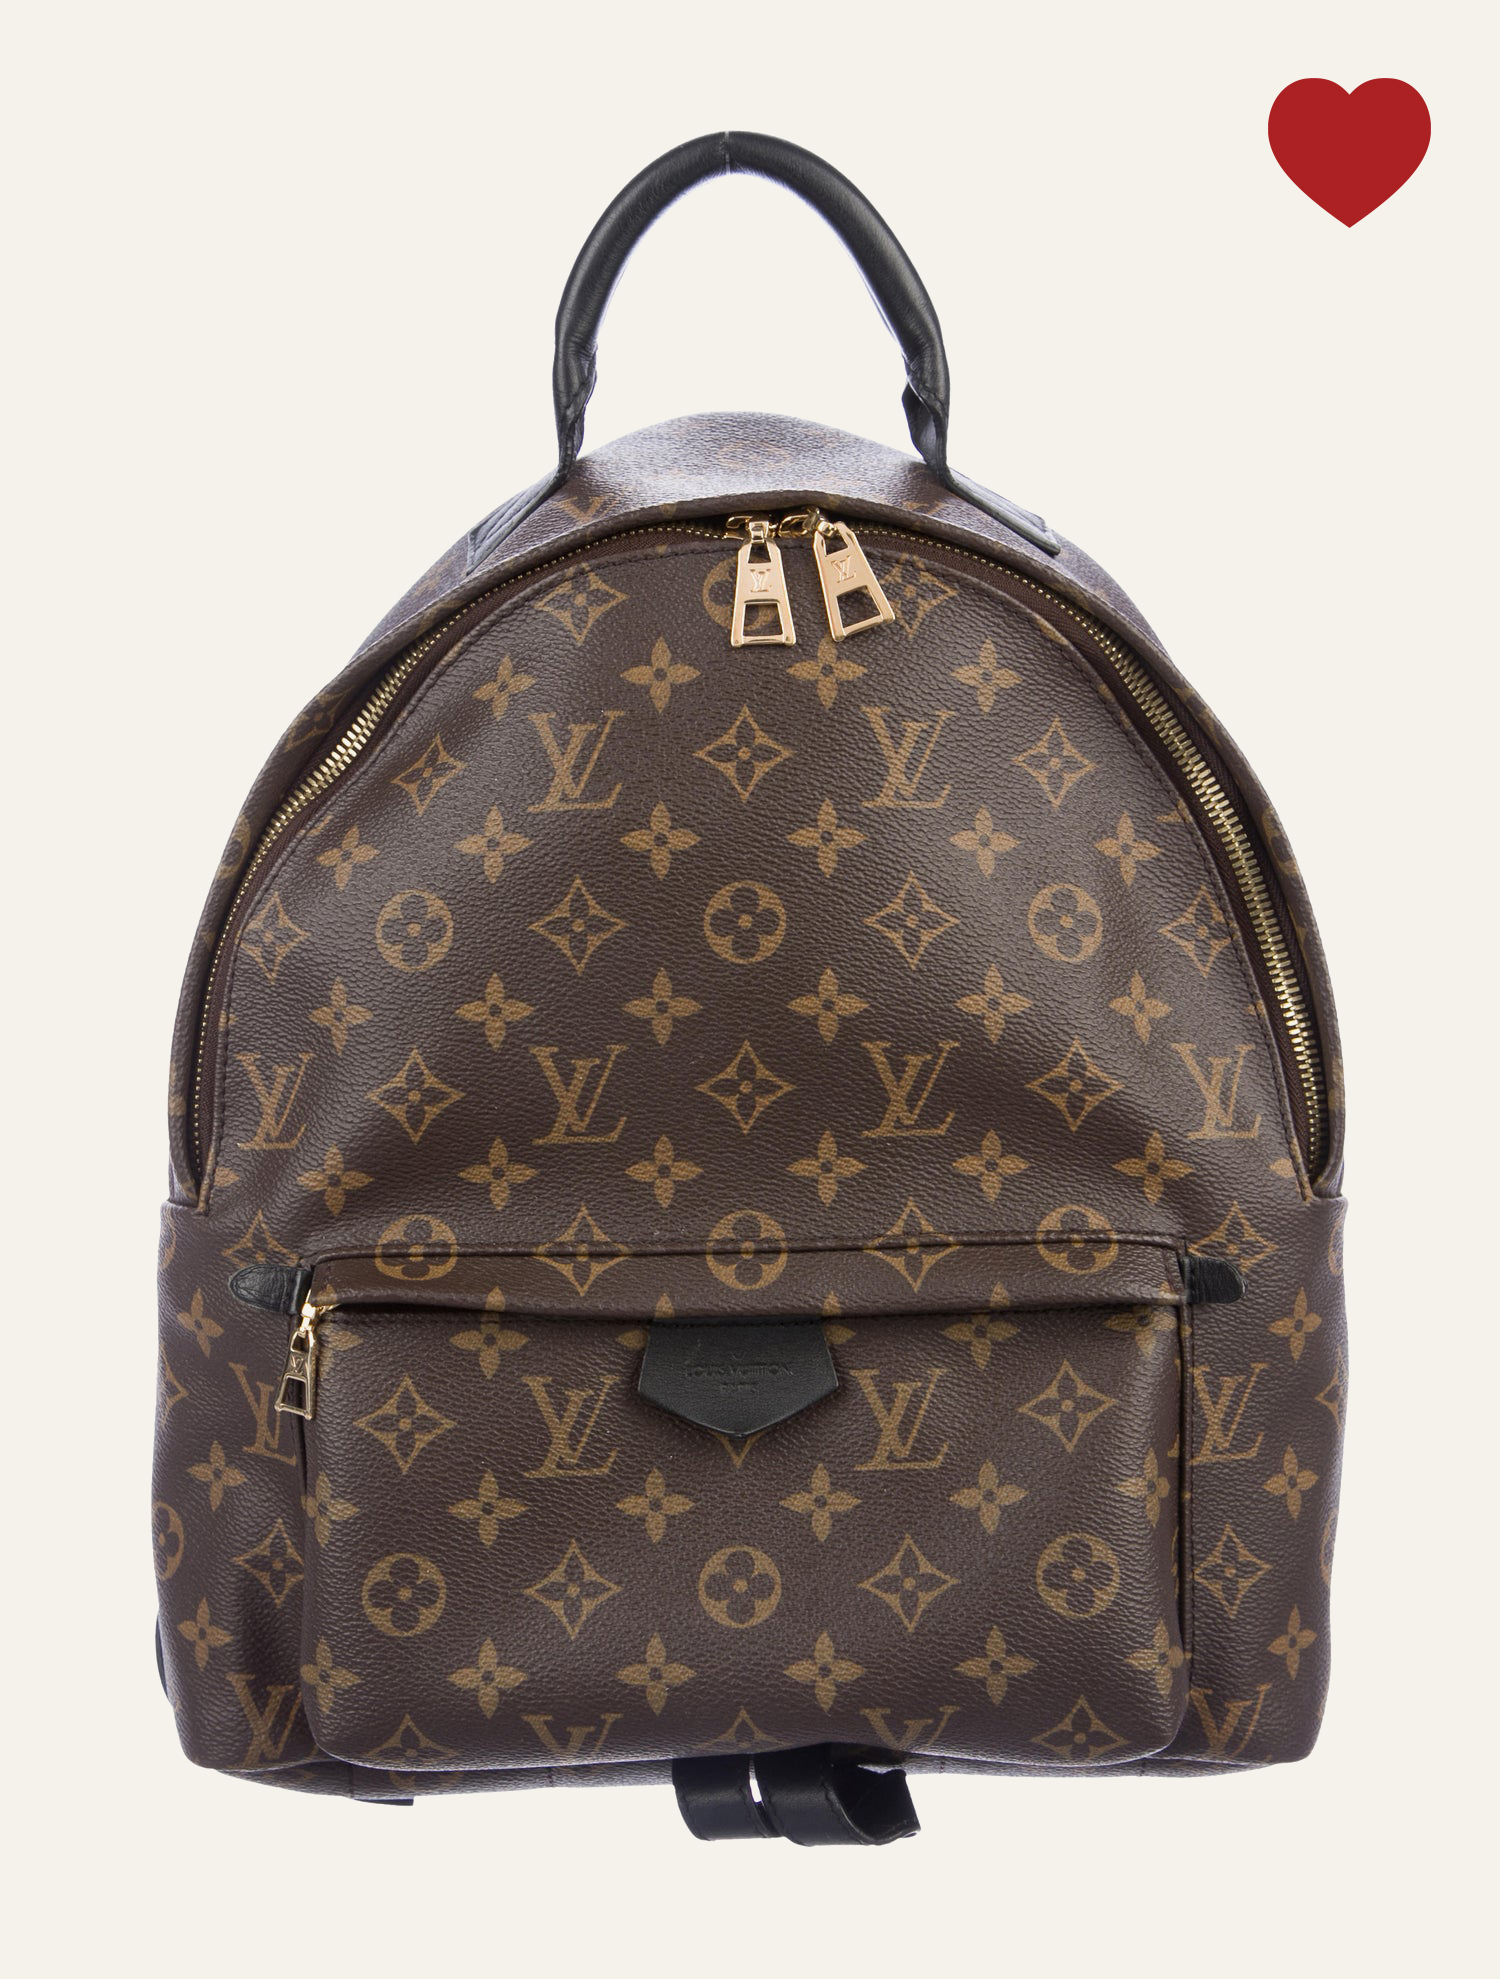 Resale Report Products-LV1